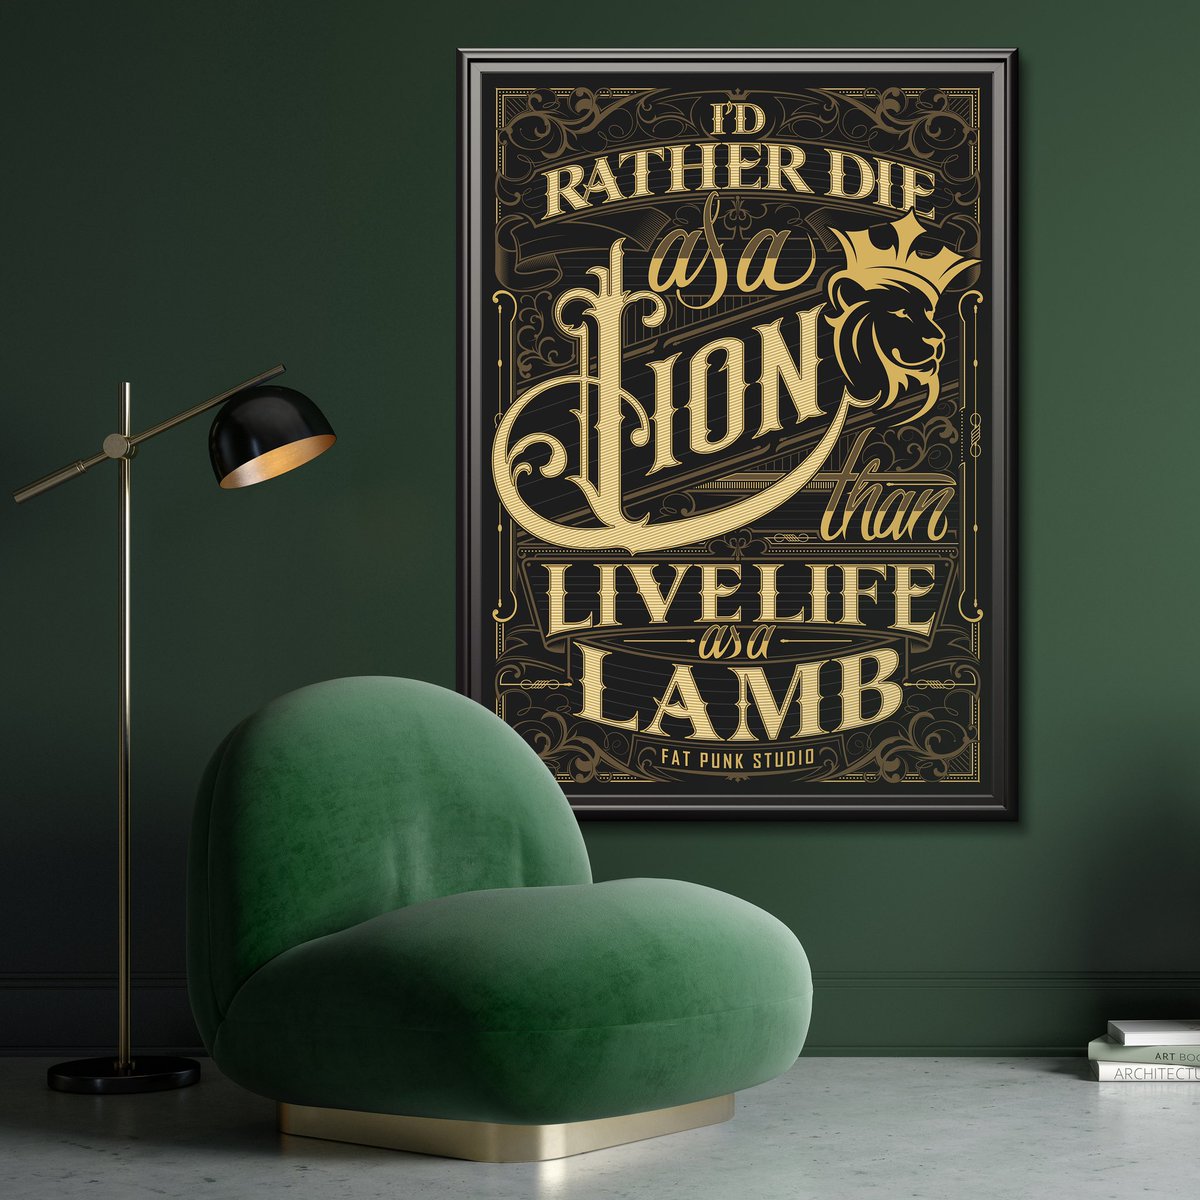 Artfully crafted. Featuring emblematic details, the iconic “Lions and Lambs” print captures the #art of #typography with a bold contemporary allure. Explore #FatPunkStudio’s Art via link in bio
•
#FatPunkStudioArt #FPSArt #contemporaryart #interiorartwork #interiorart